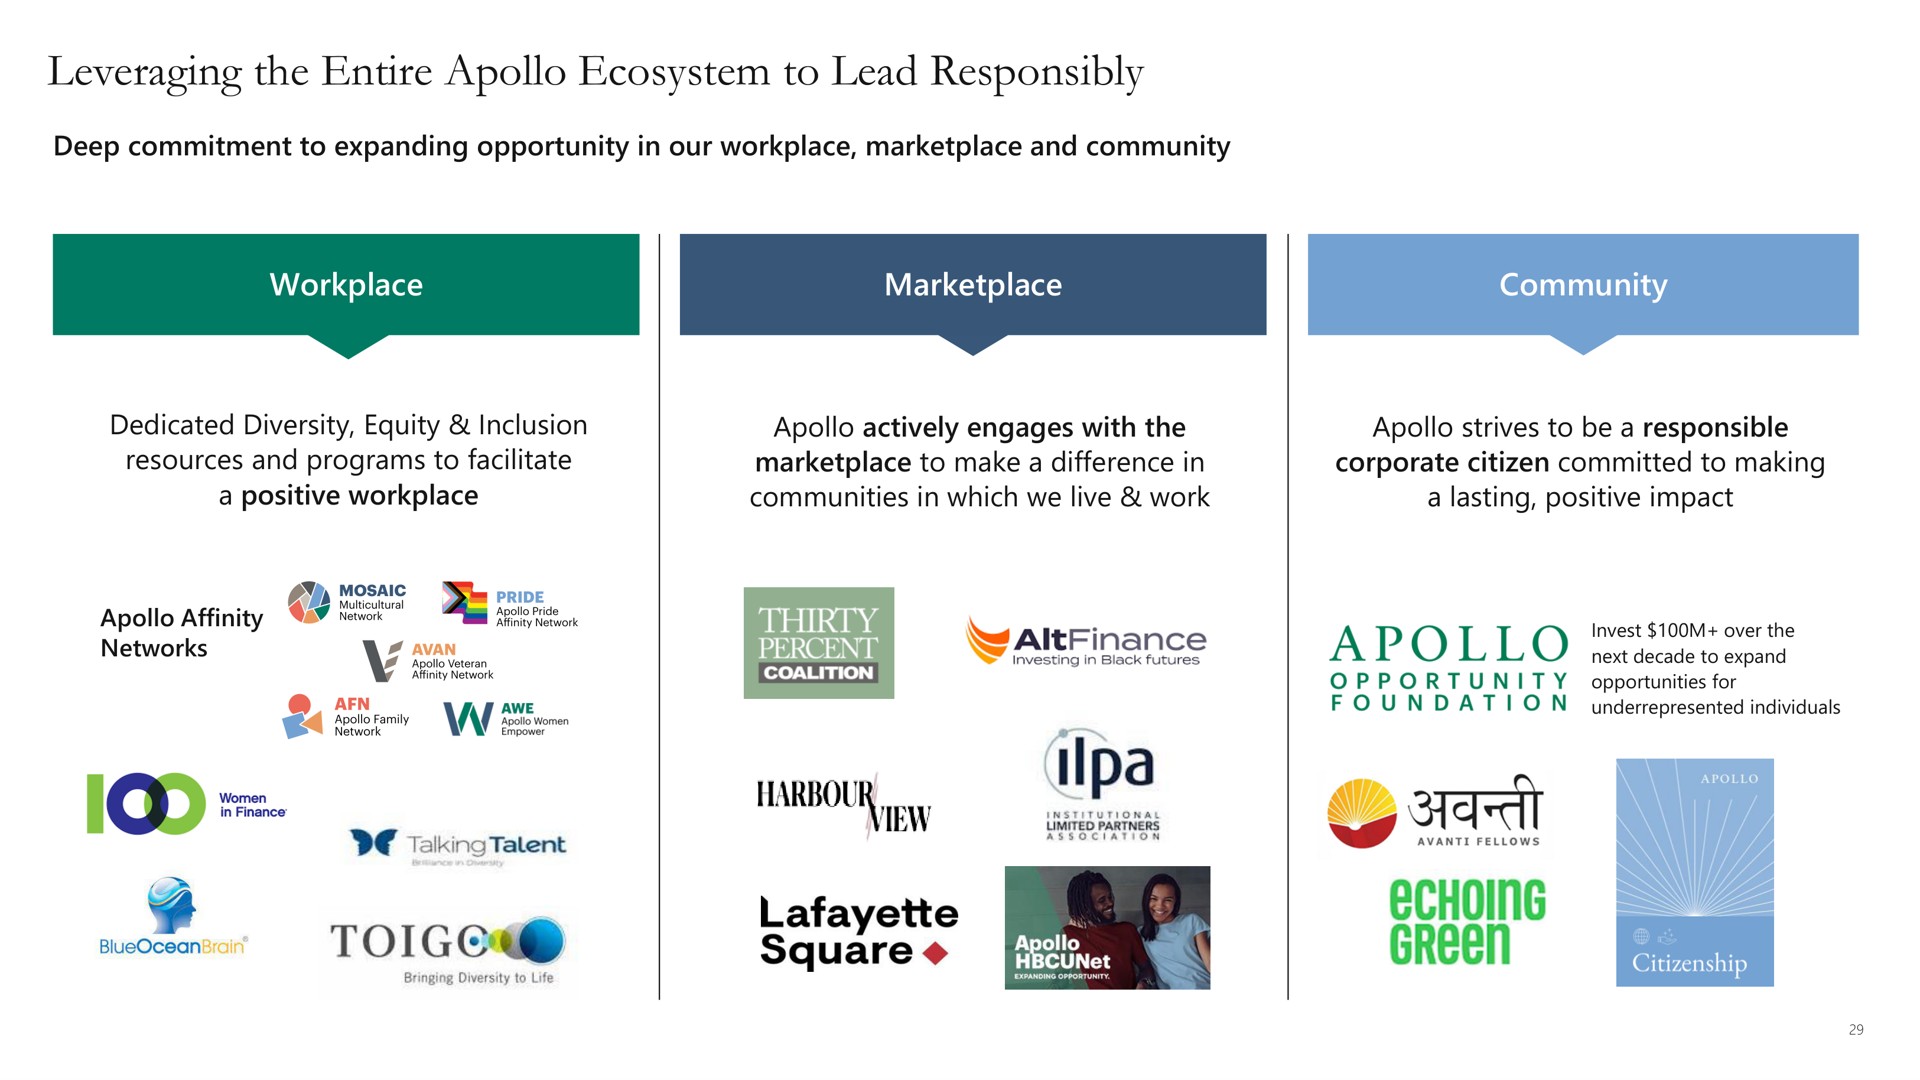 leveraging the entire ecosystem to lead responsibly etch one lafayette square echoing green | Apollo Global Management